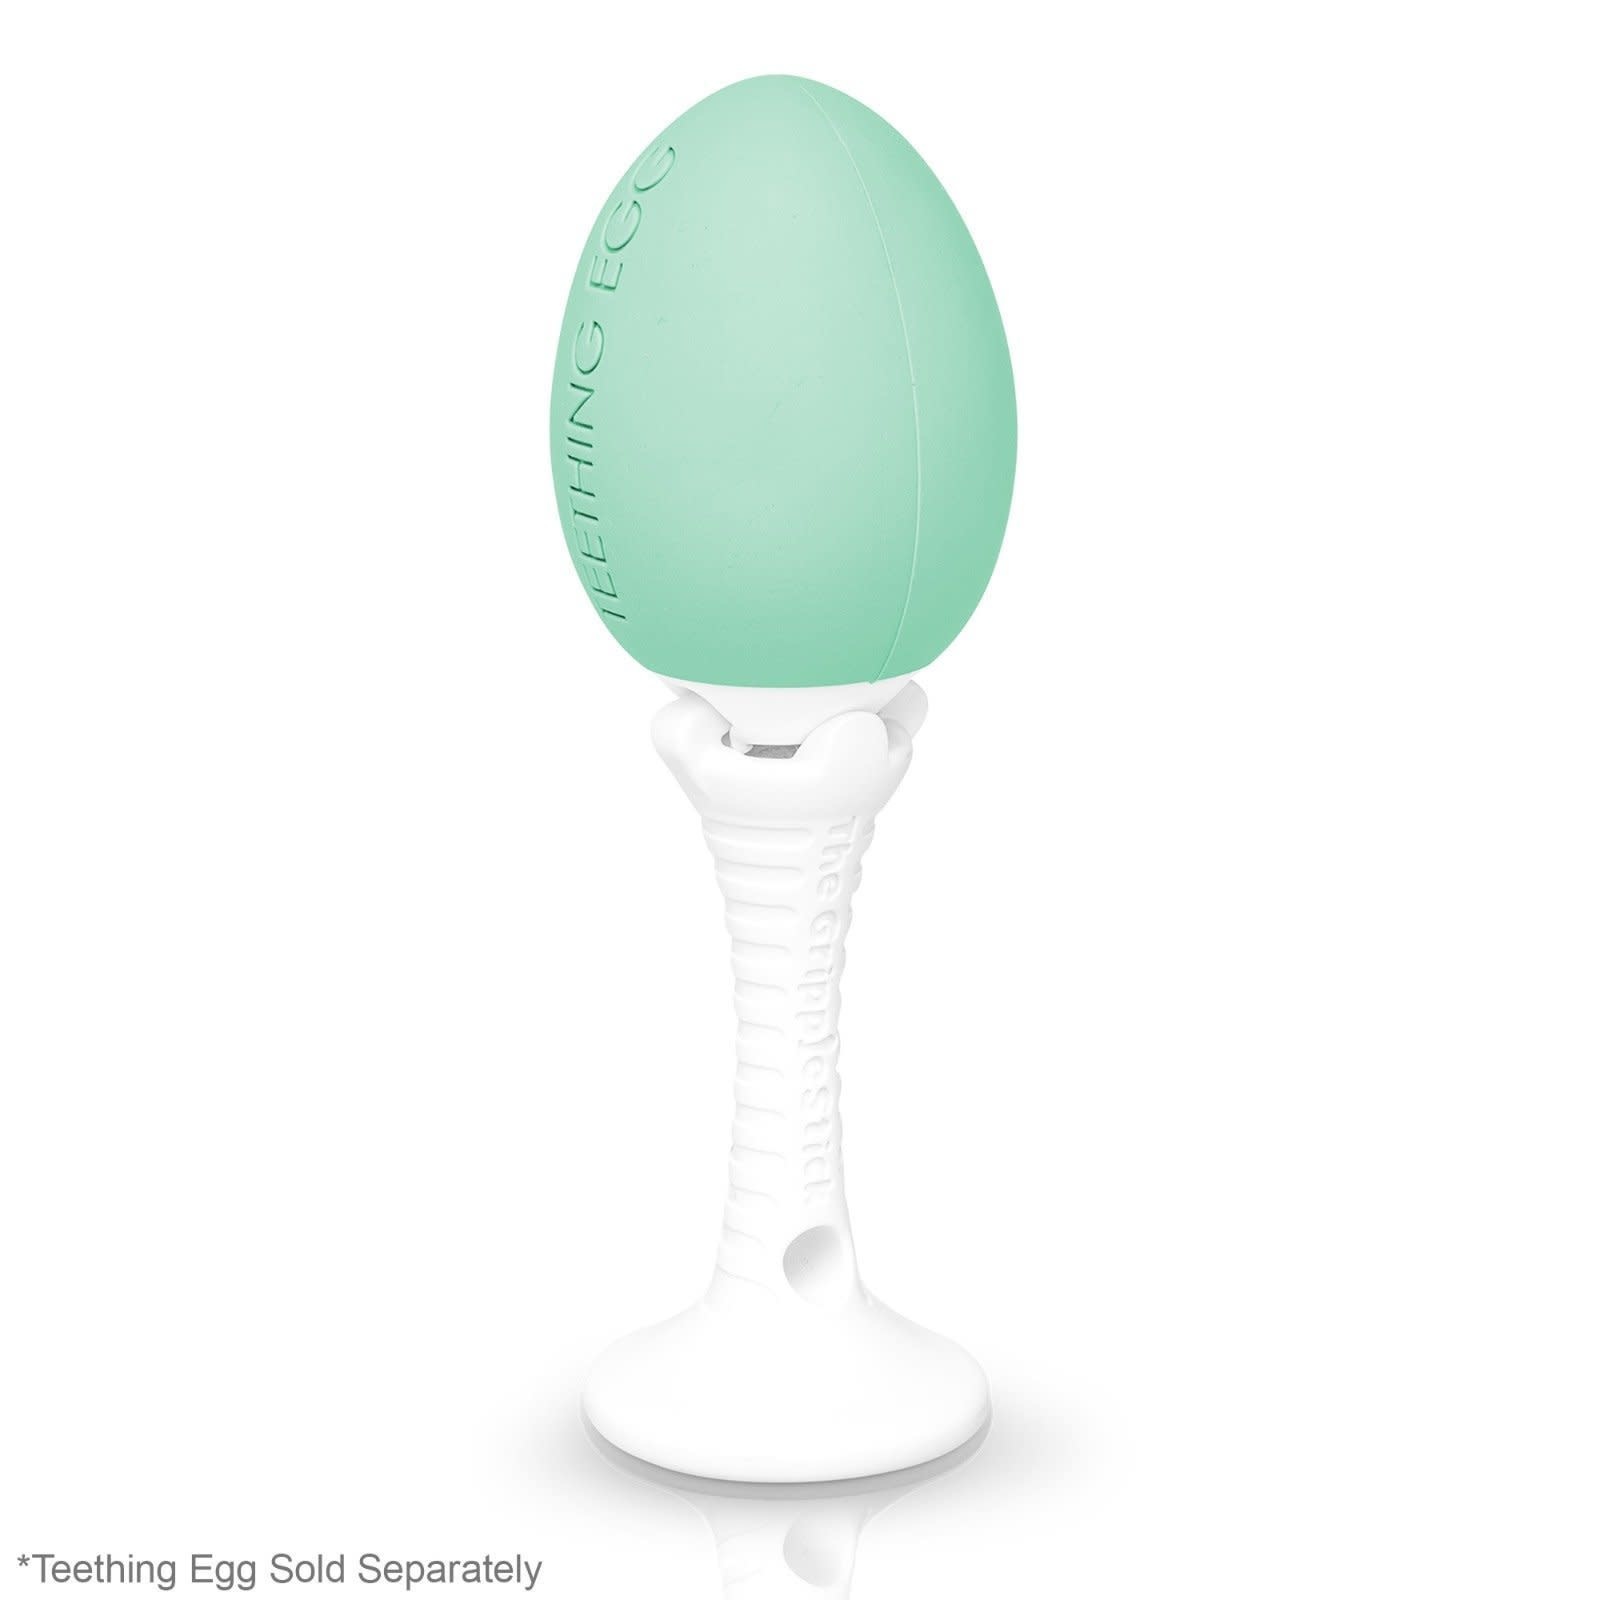 the teething egg in stores